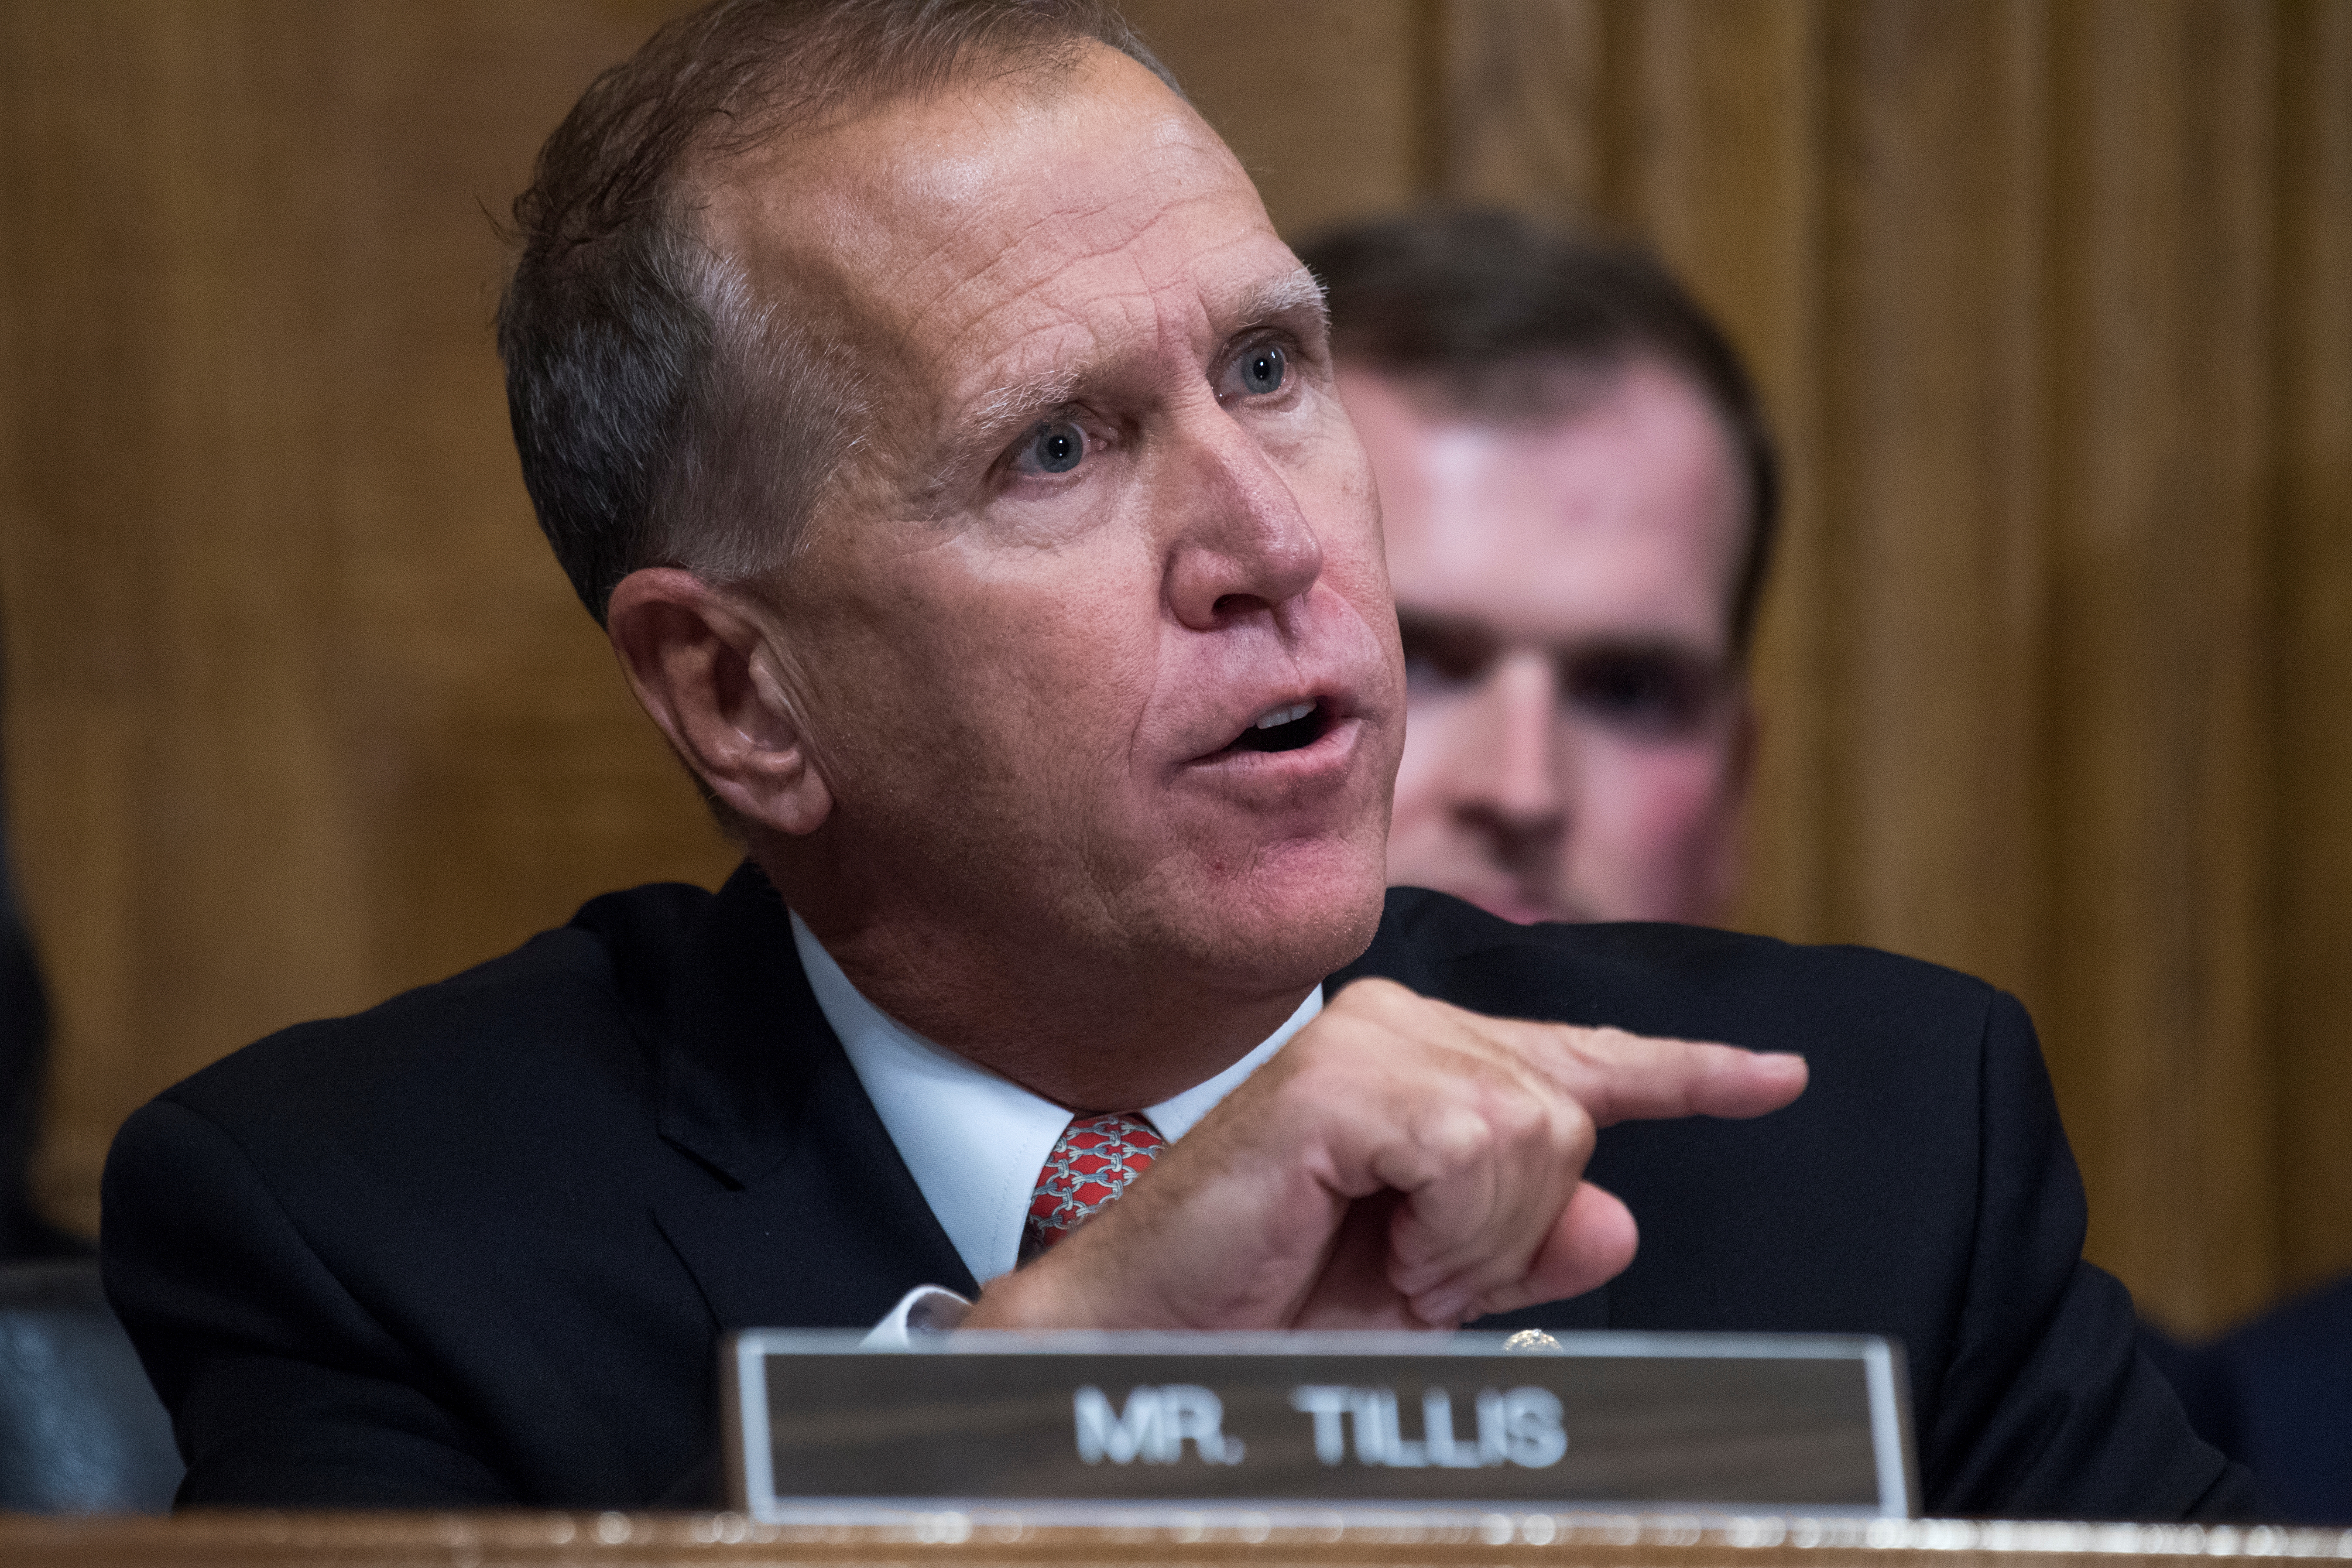 Sen. Thom Tillis, R-N.C., questions Judge Brett Kavanaugh during the Senate Judiciary Committee hearing on his nomination be an associate justice of the Supreme Court of the United States, on Capitol Hill in Washington, DC, U.S., September 27, 2018. Tom Williams/Pool via REUTERS